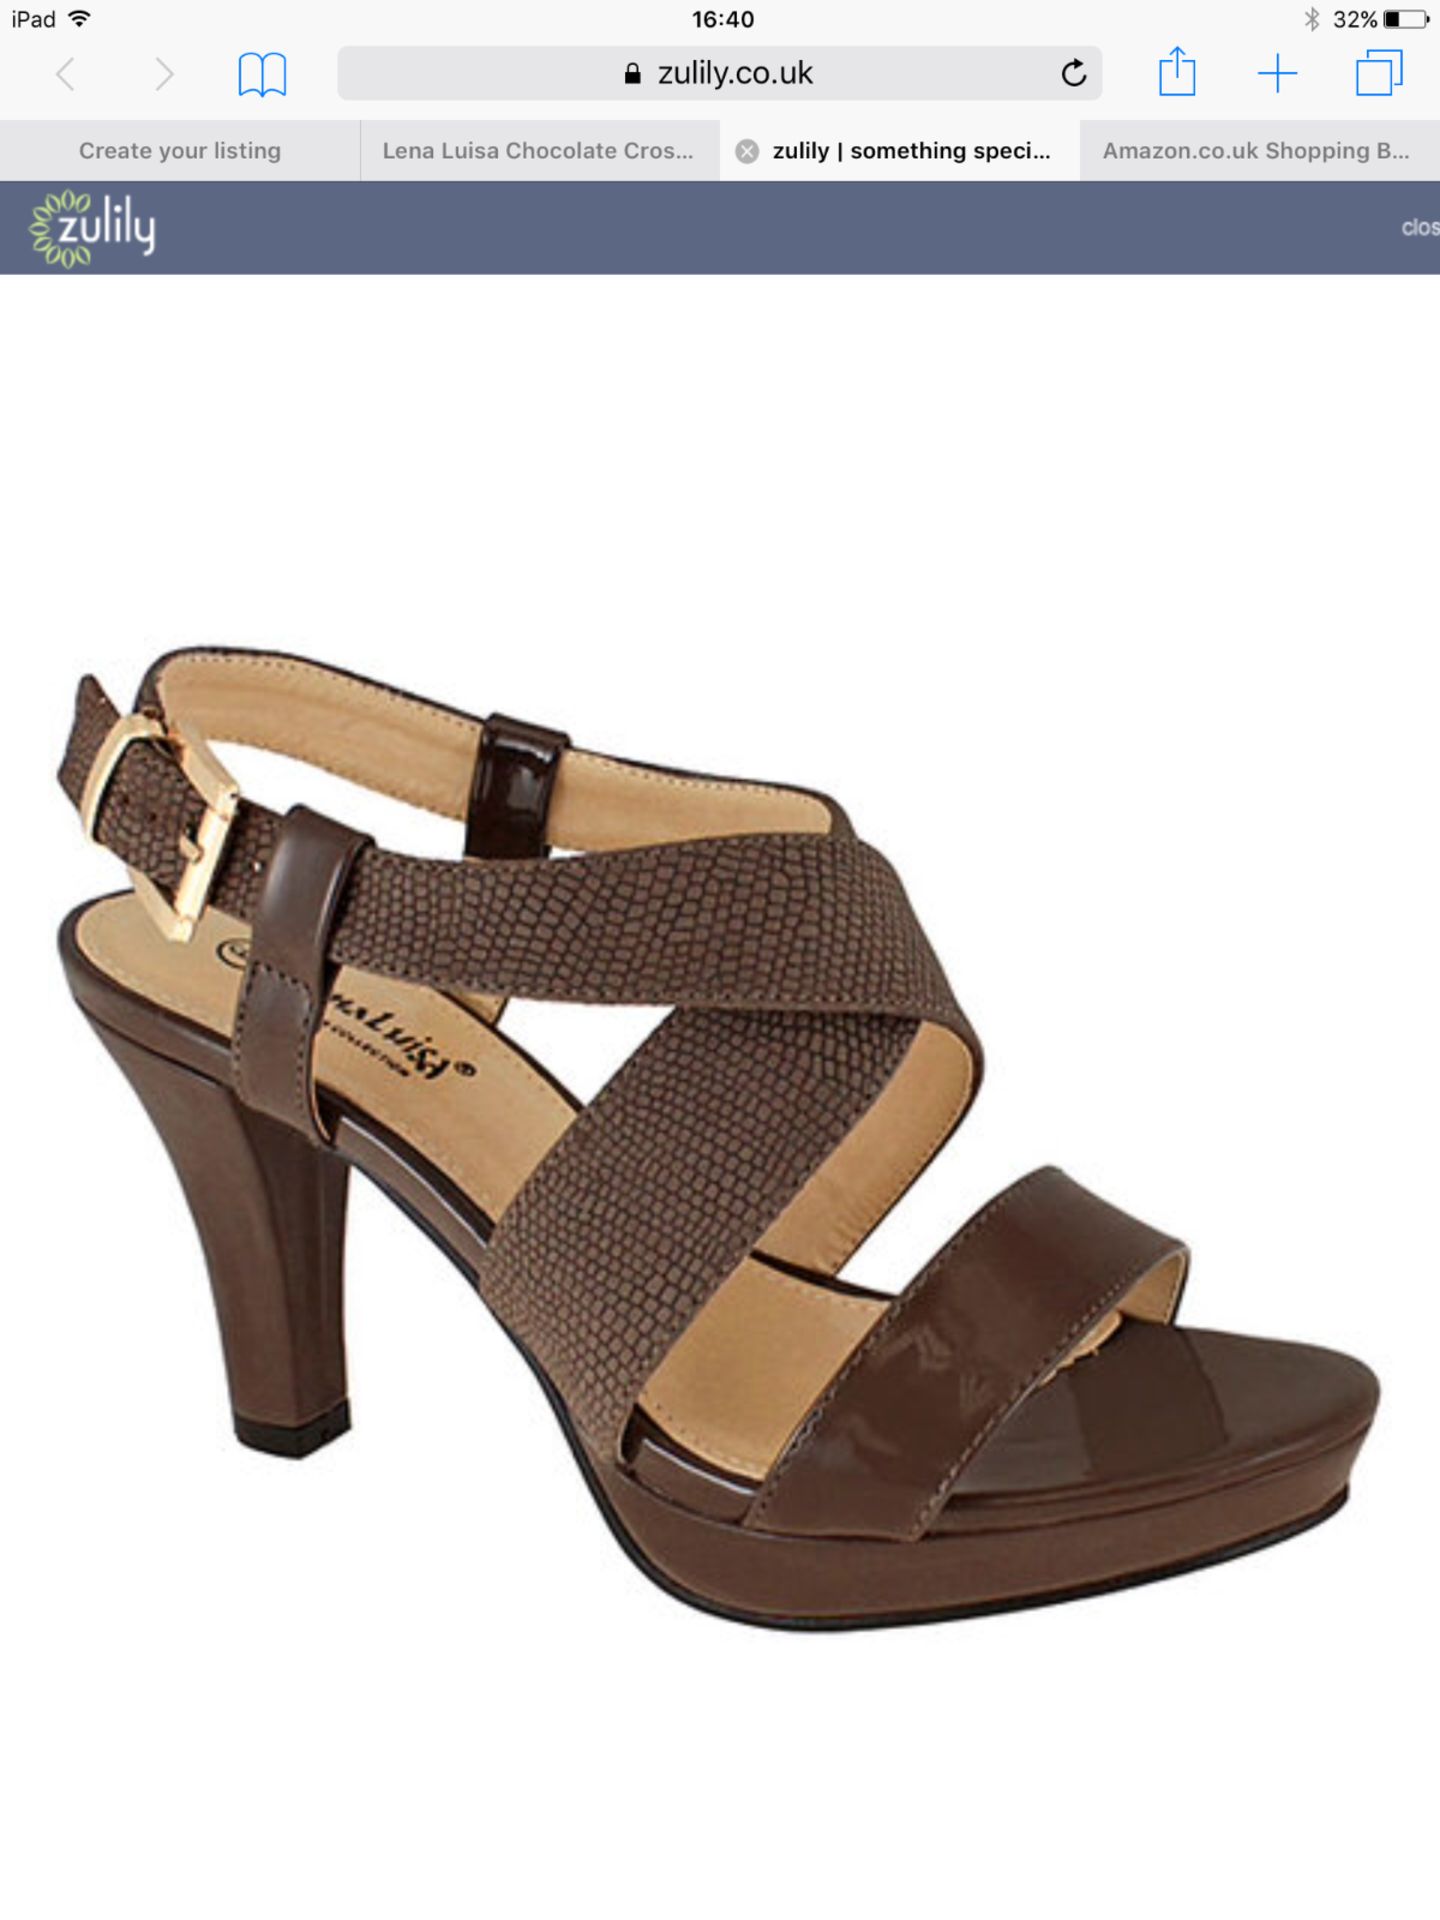 Lena Luisa Chocolate Crossover Daphny Lizard Embossed Sandal, Size Eur 38, RRP (New with box)